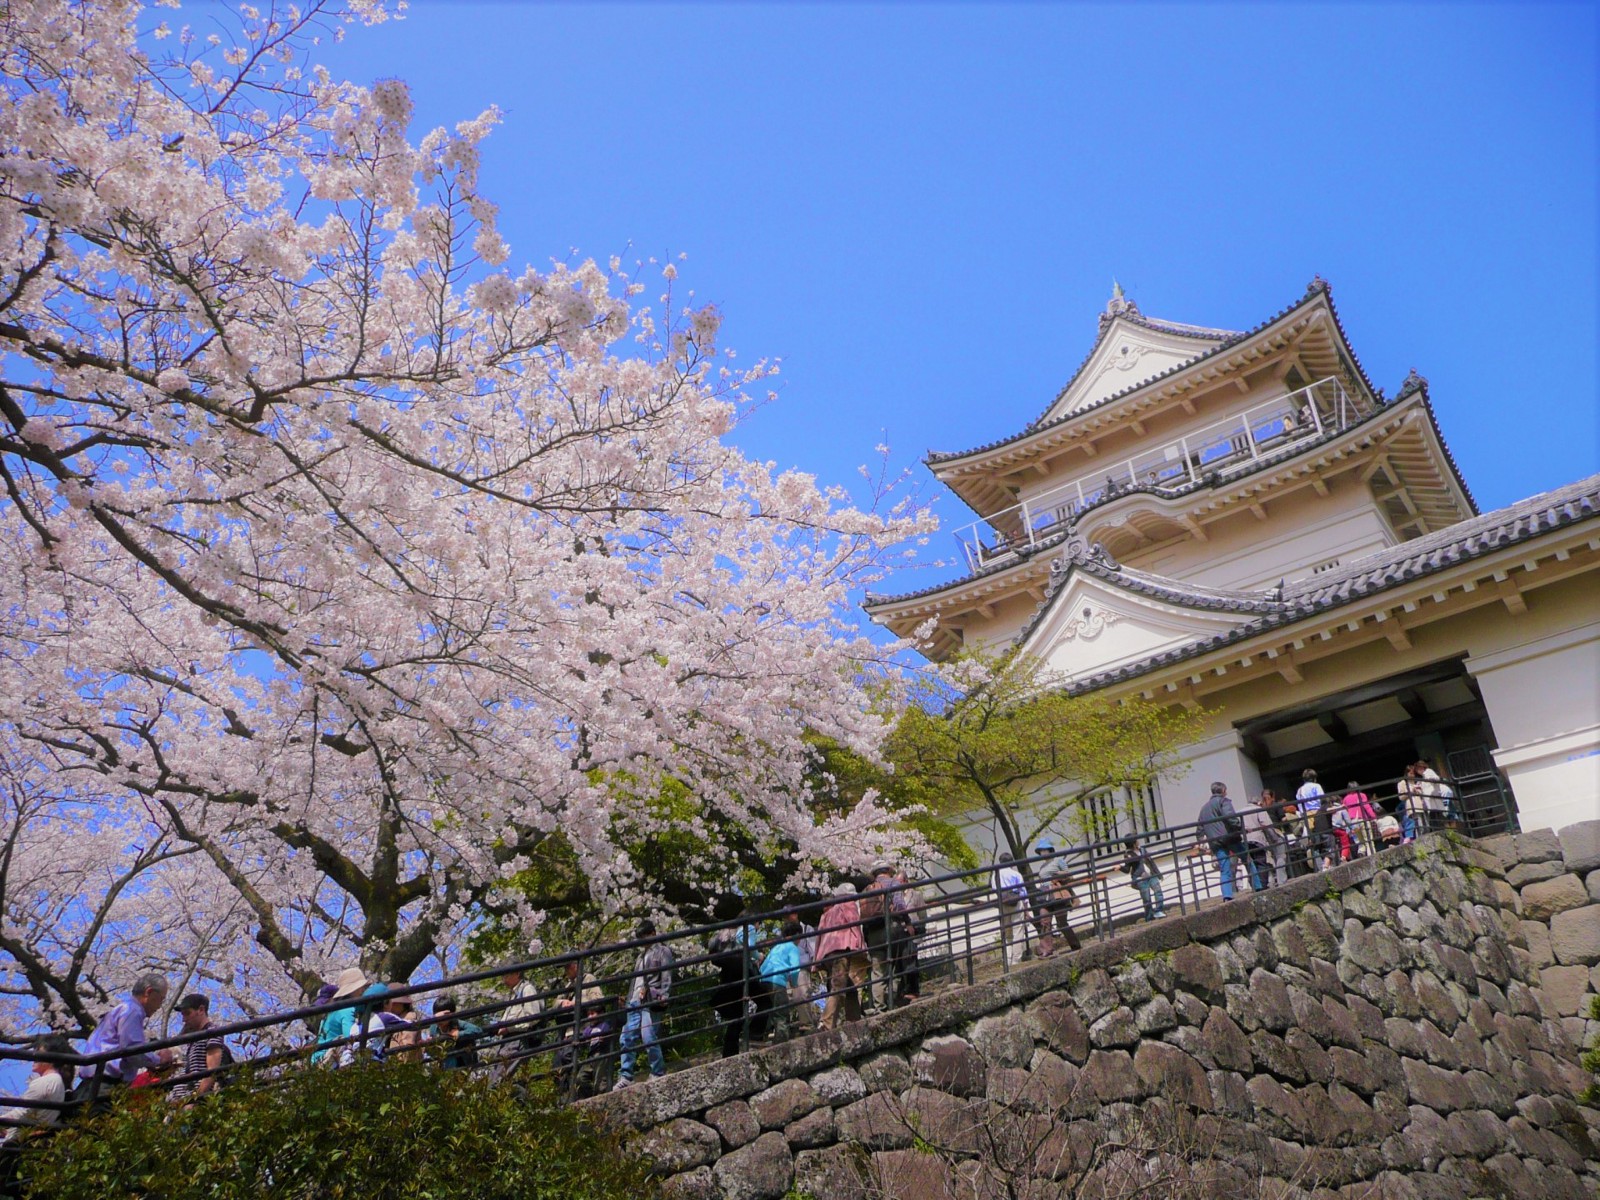 One Day Trips from Tokyo in Spring: Best Cherry Blossom Spots near Tokyo